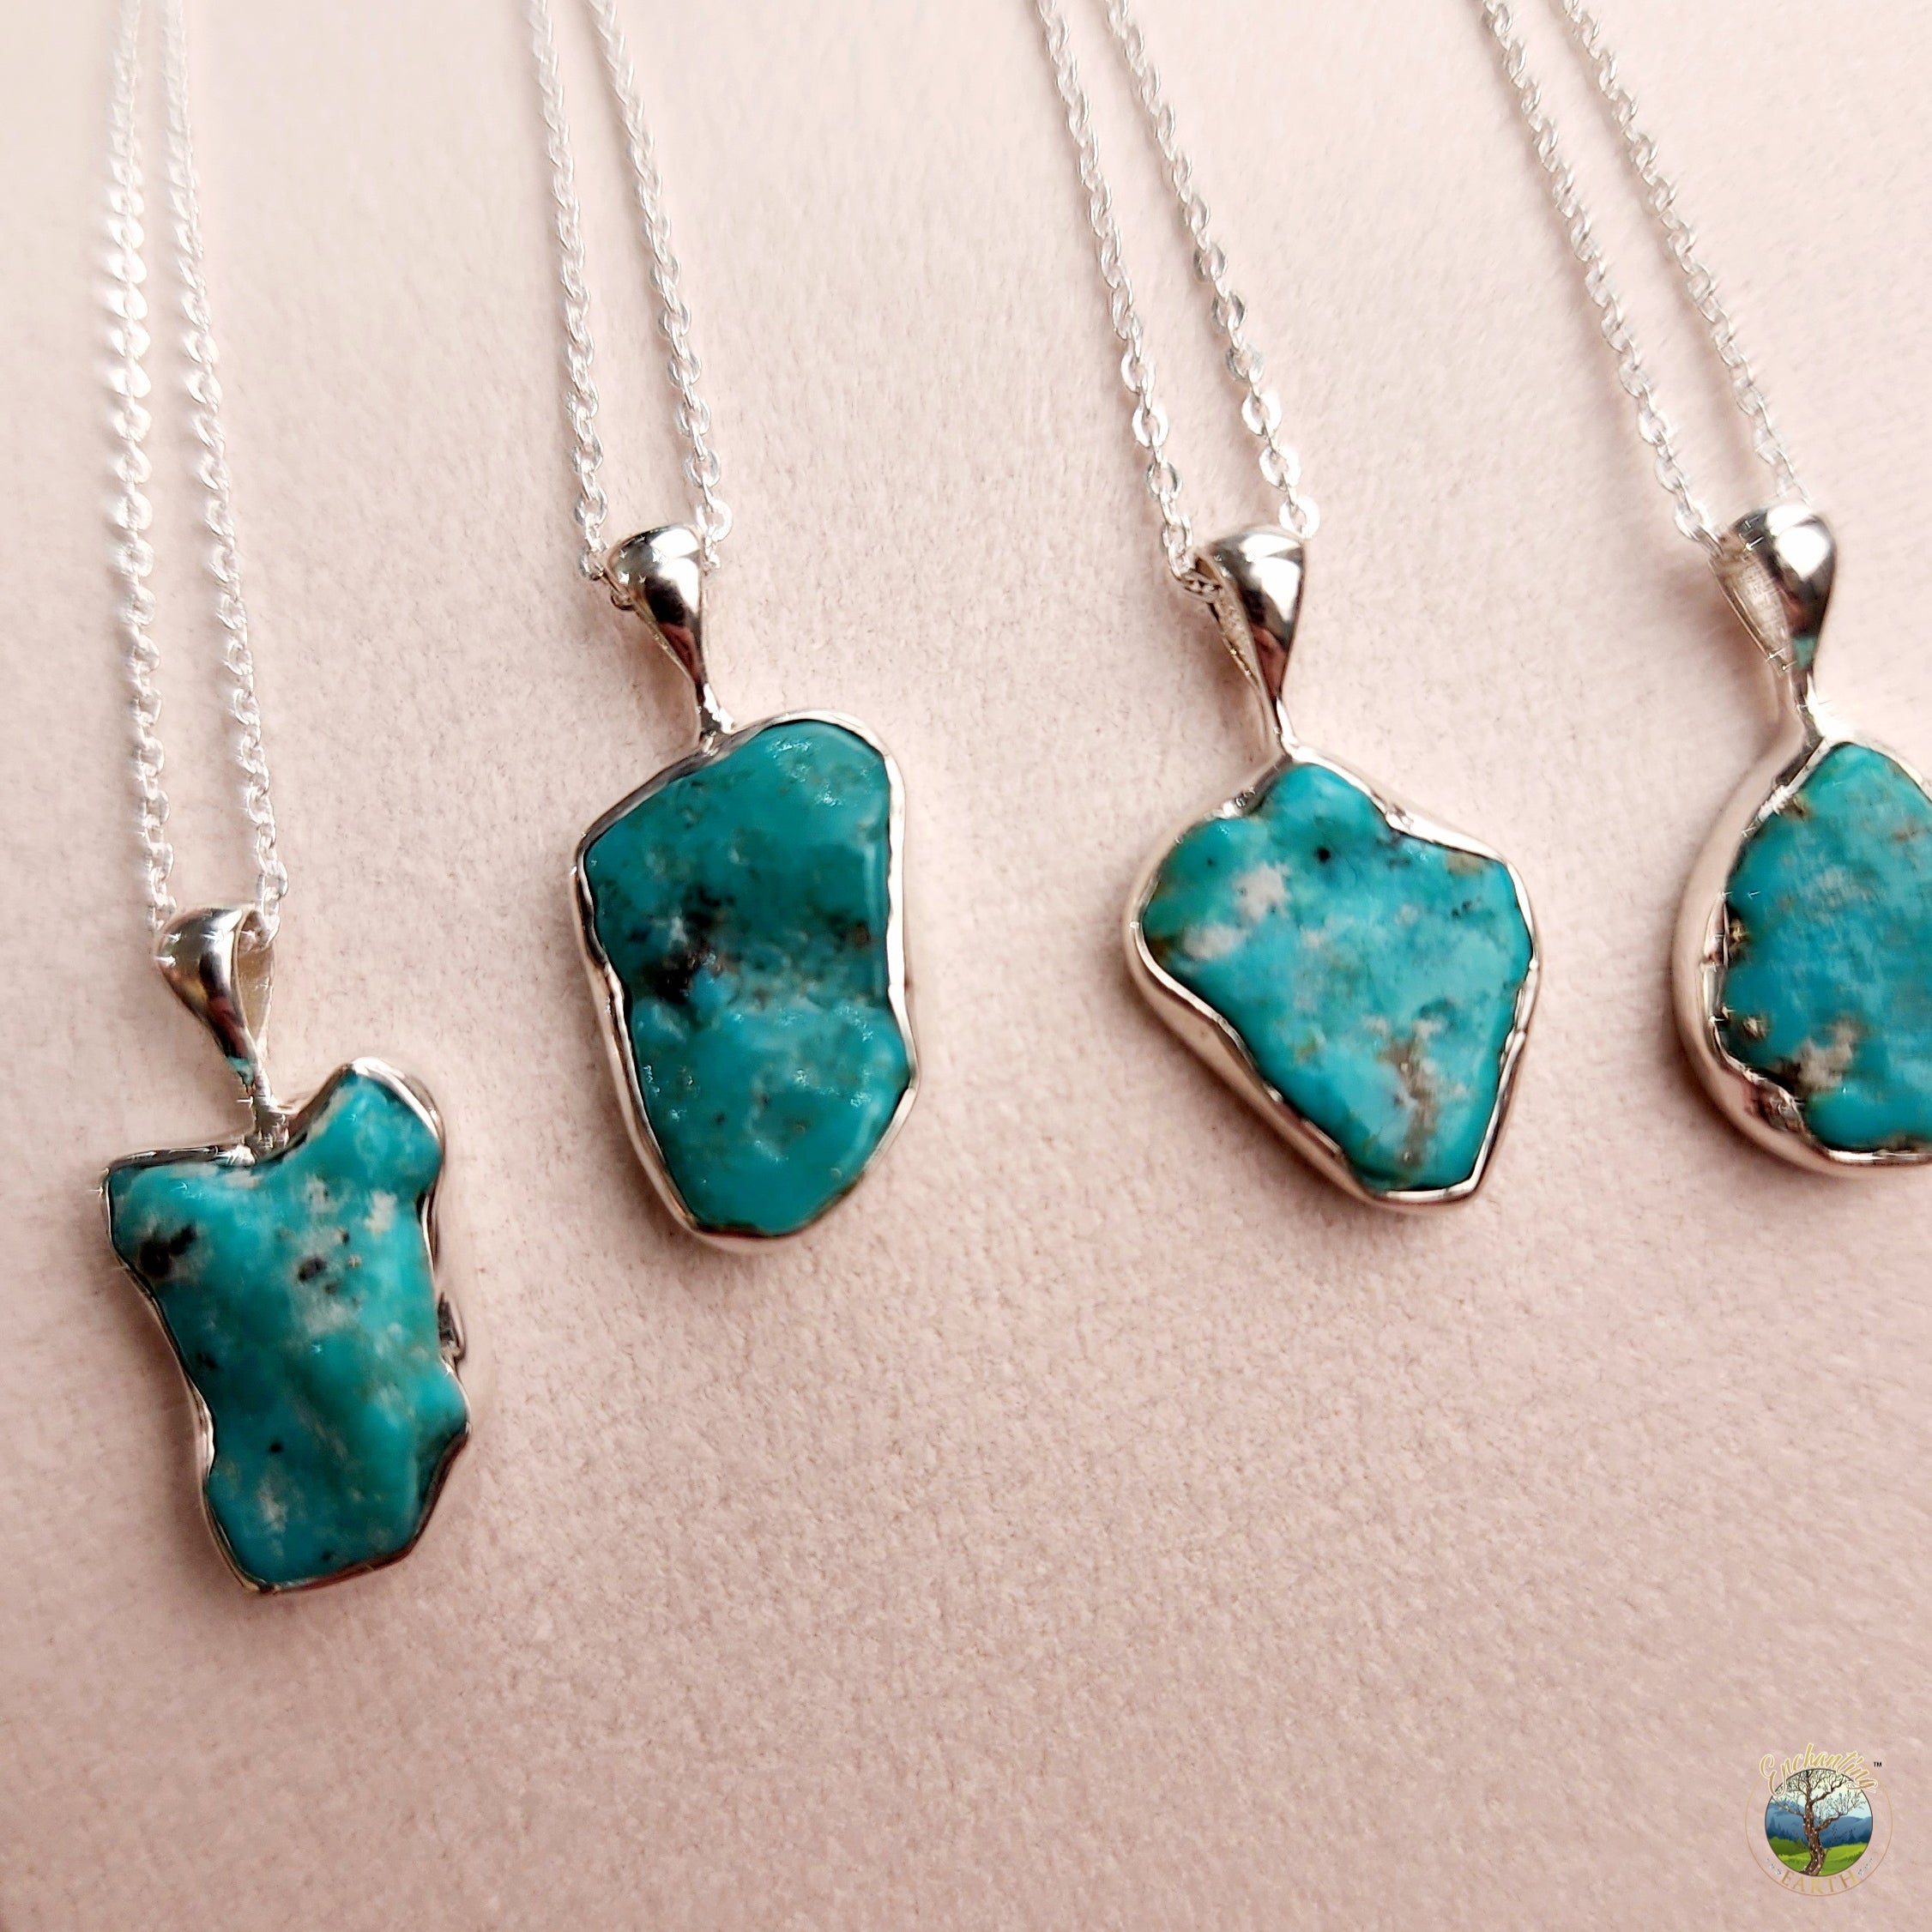 Tibetan Turquoise Raw Necklace .925 Silver for Good Luck, Prosperity and Protection